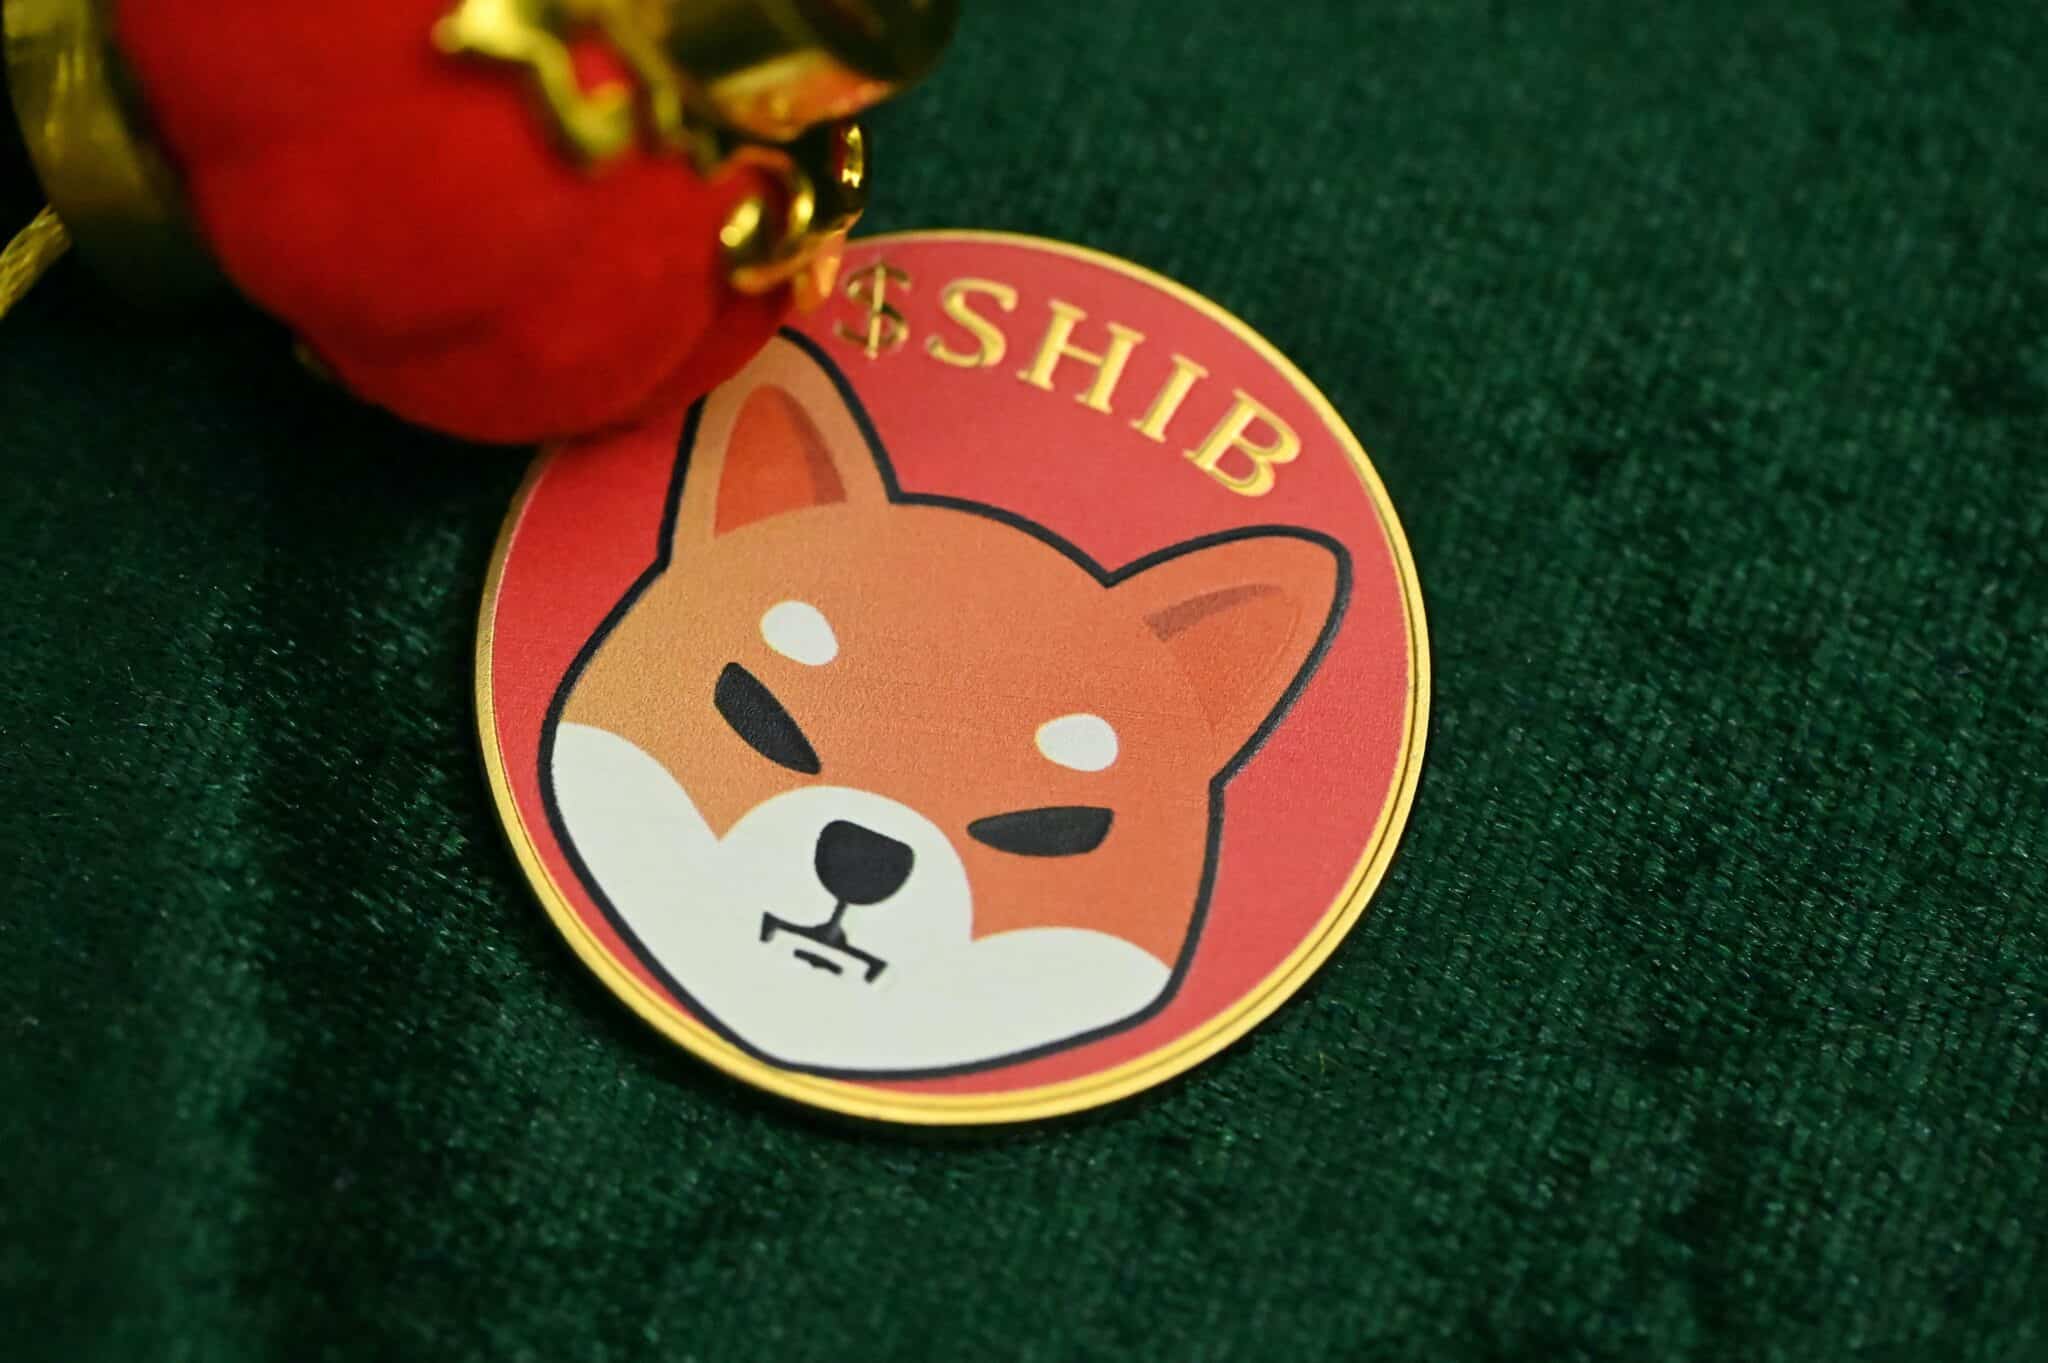 A red SHIB coin on a green velvet